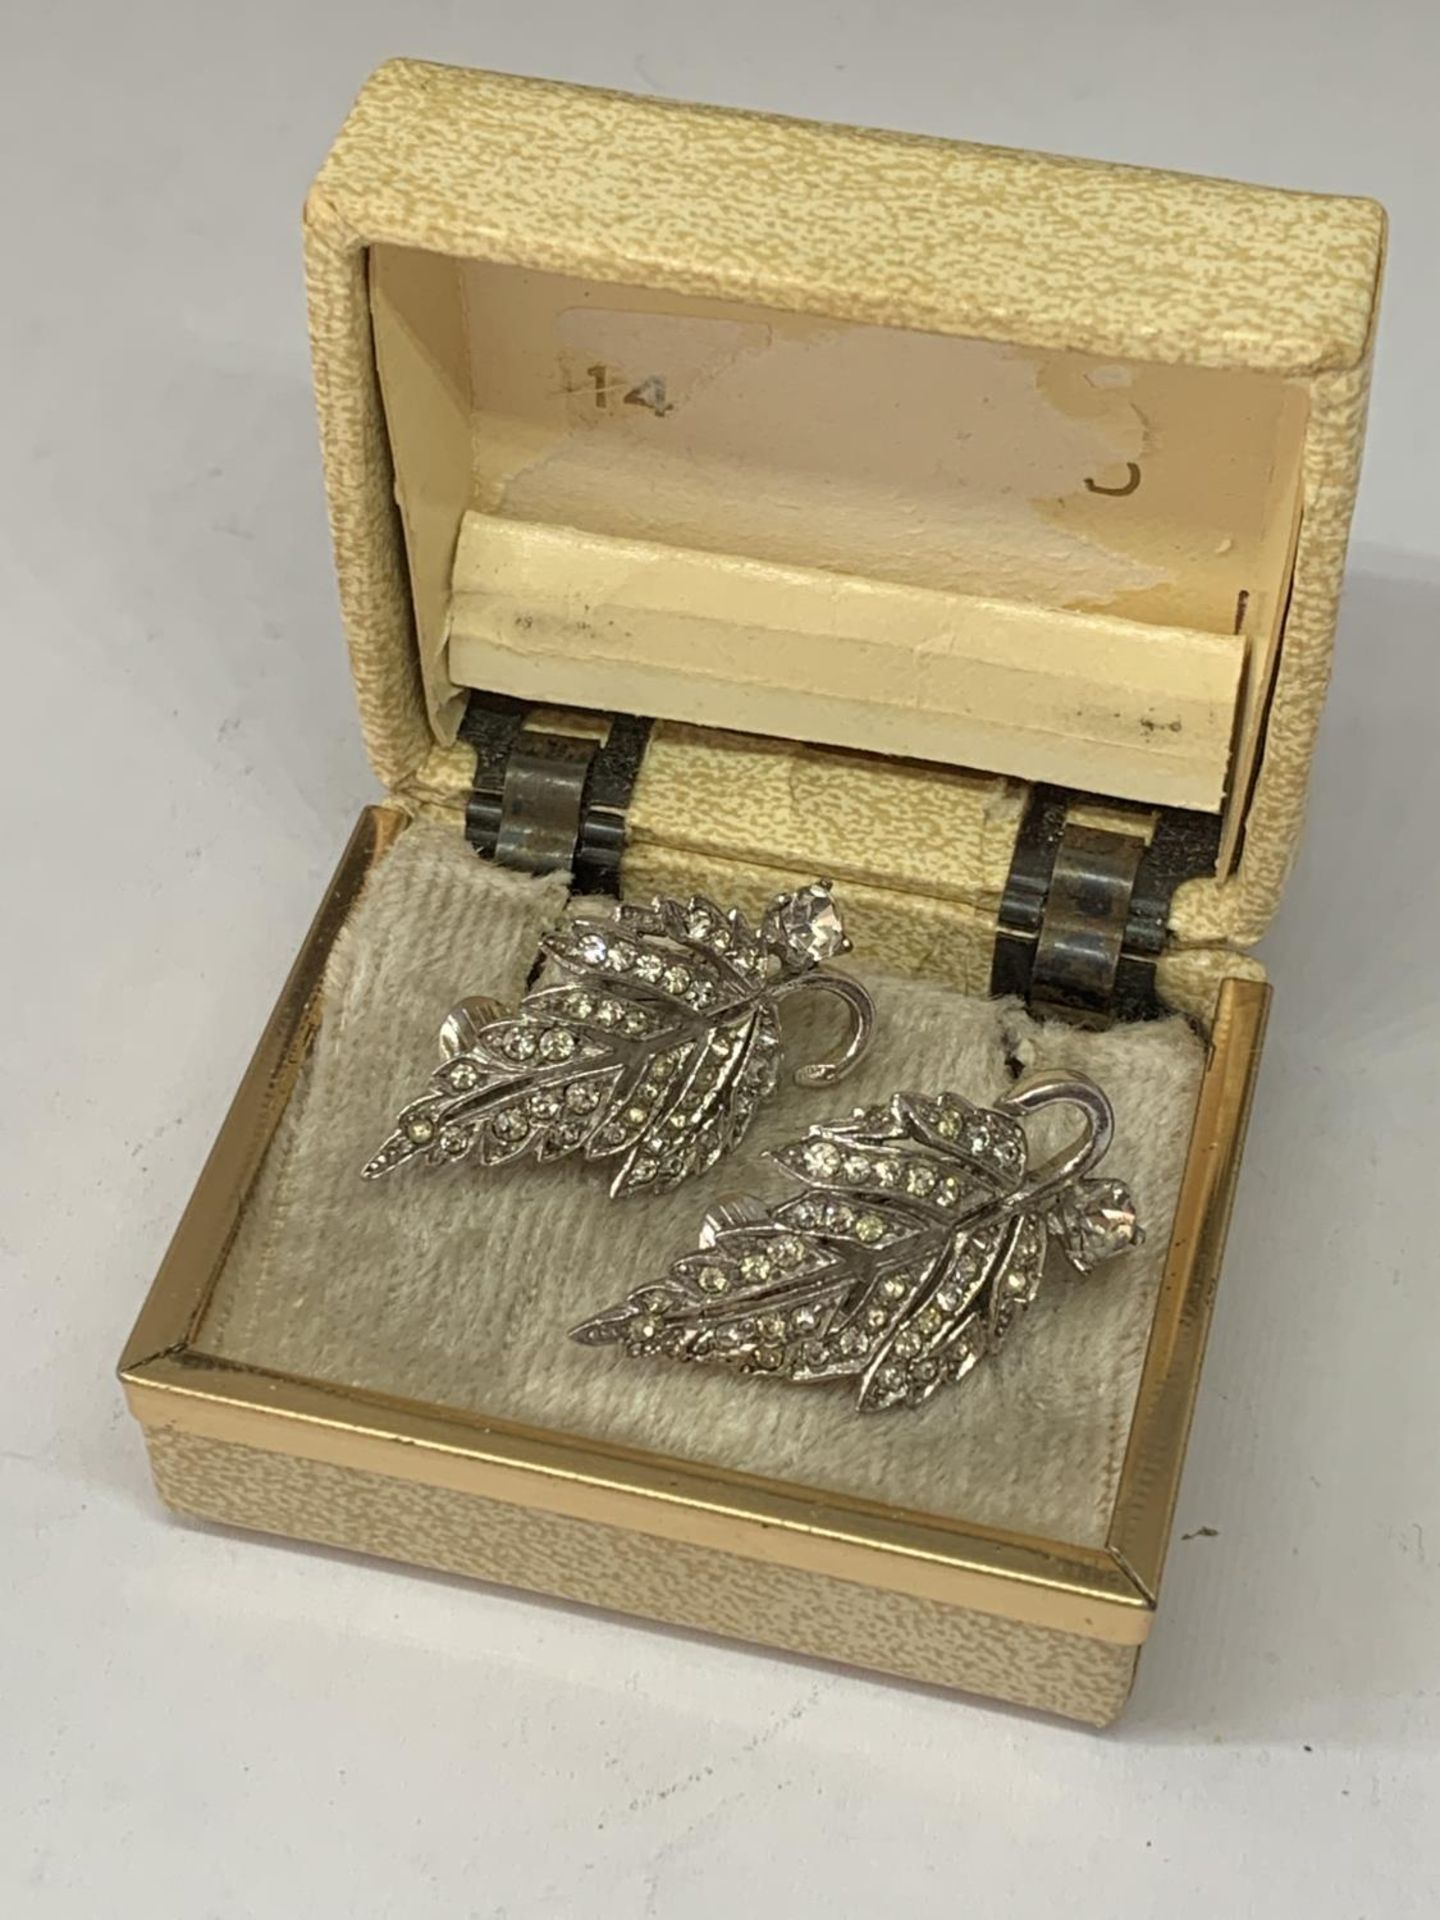 A PAIR OF 1940'S METAL RHODIUM AND CLEAR STONE EARRINGS IN A LEAF DESIGN WITH PRESENTATION BOX